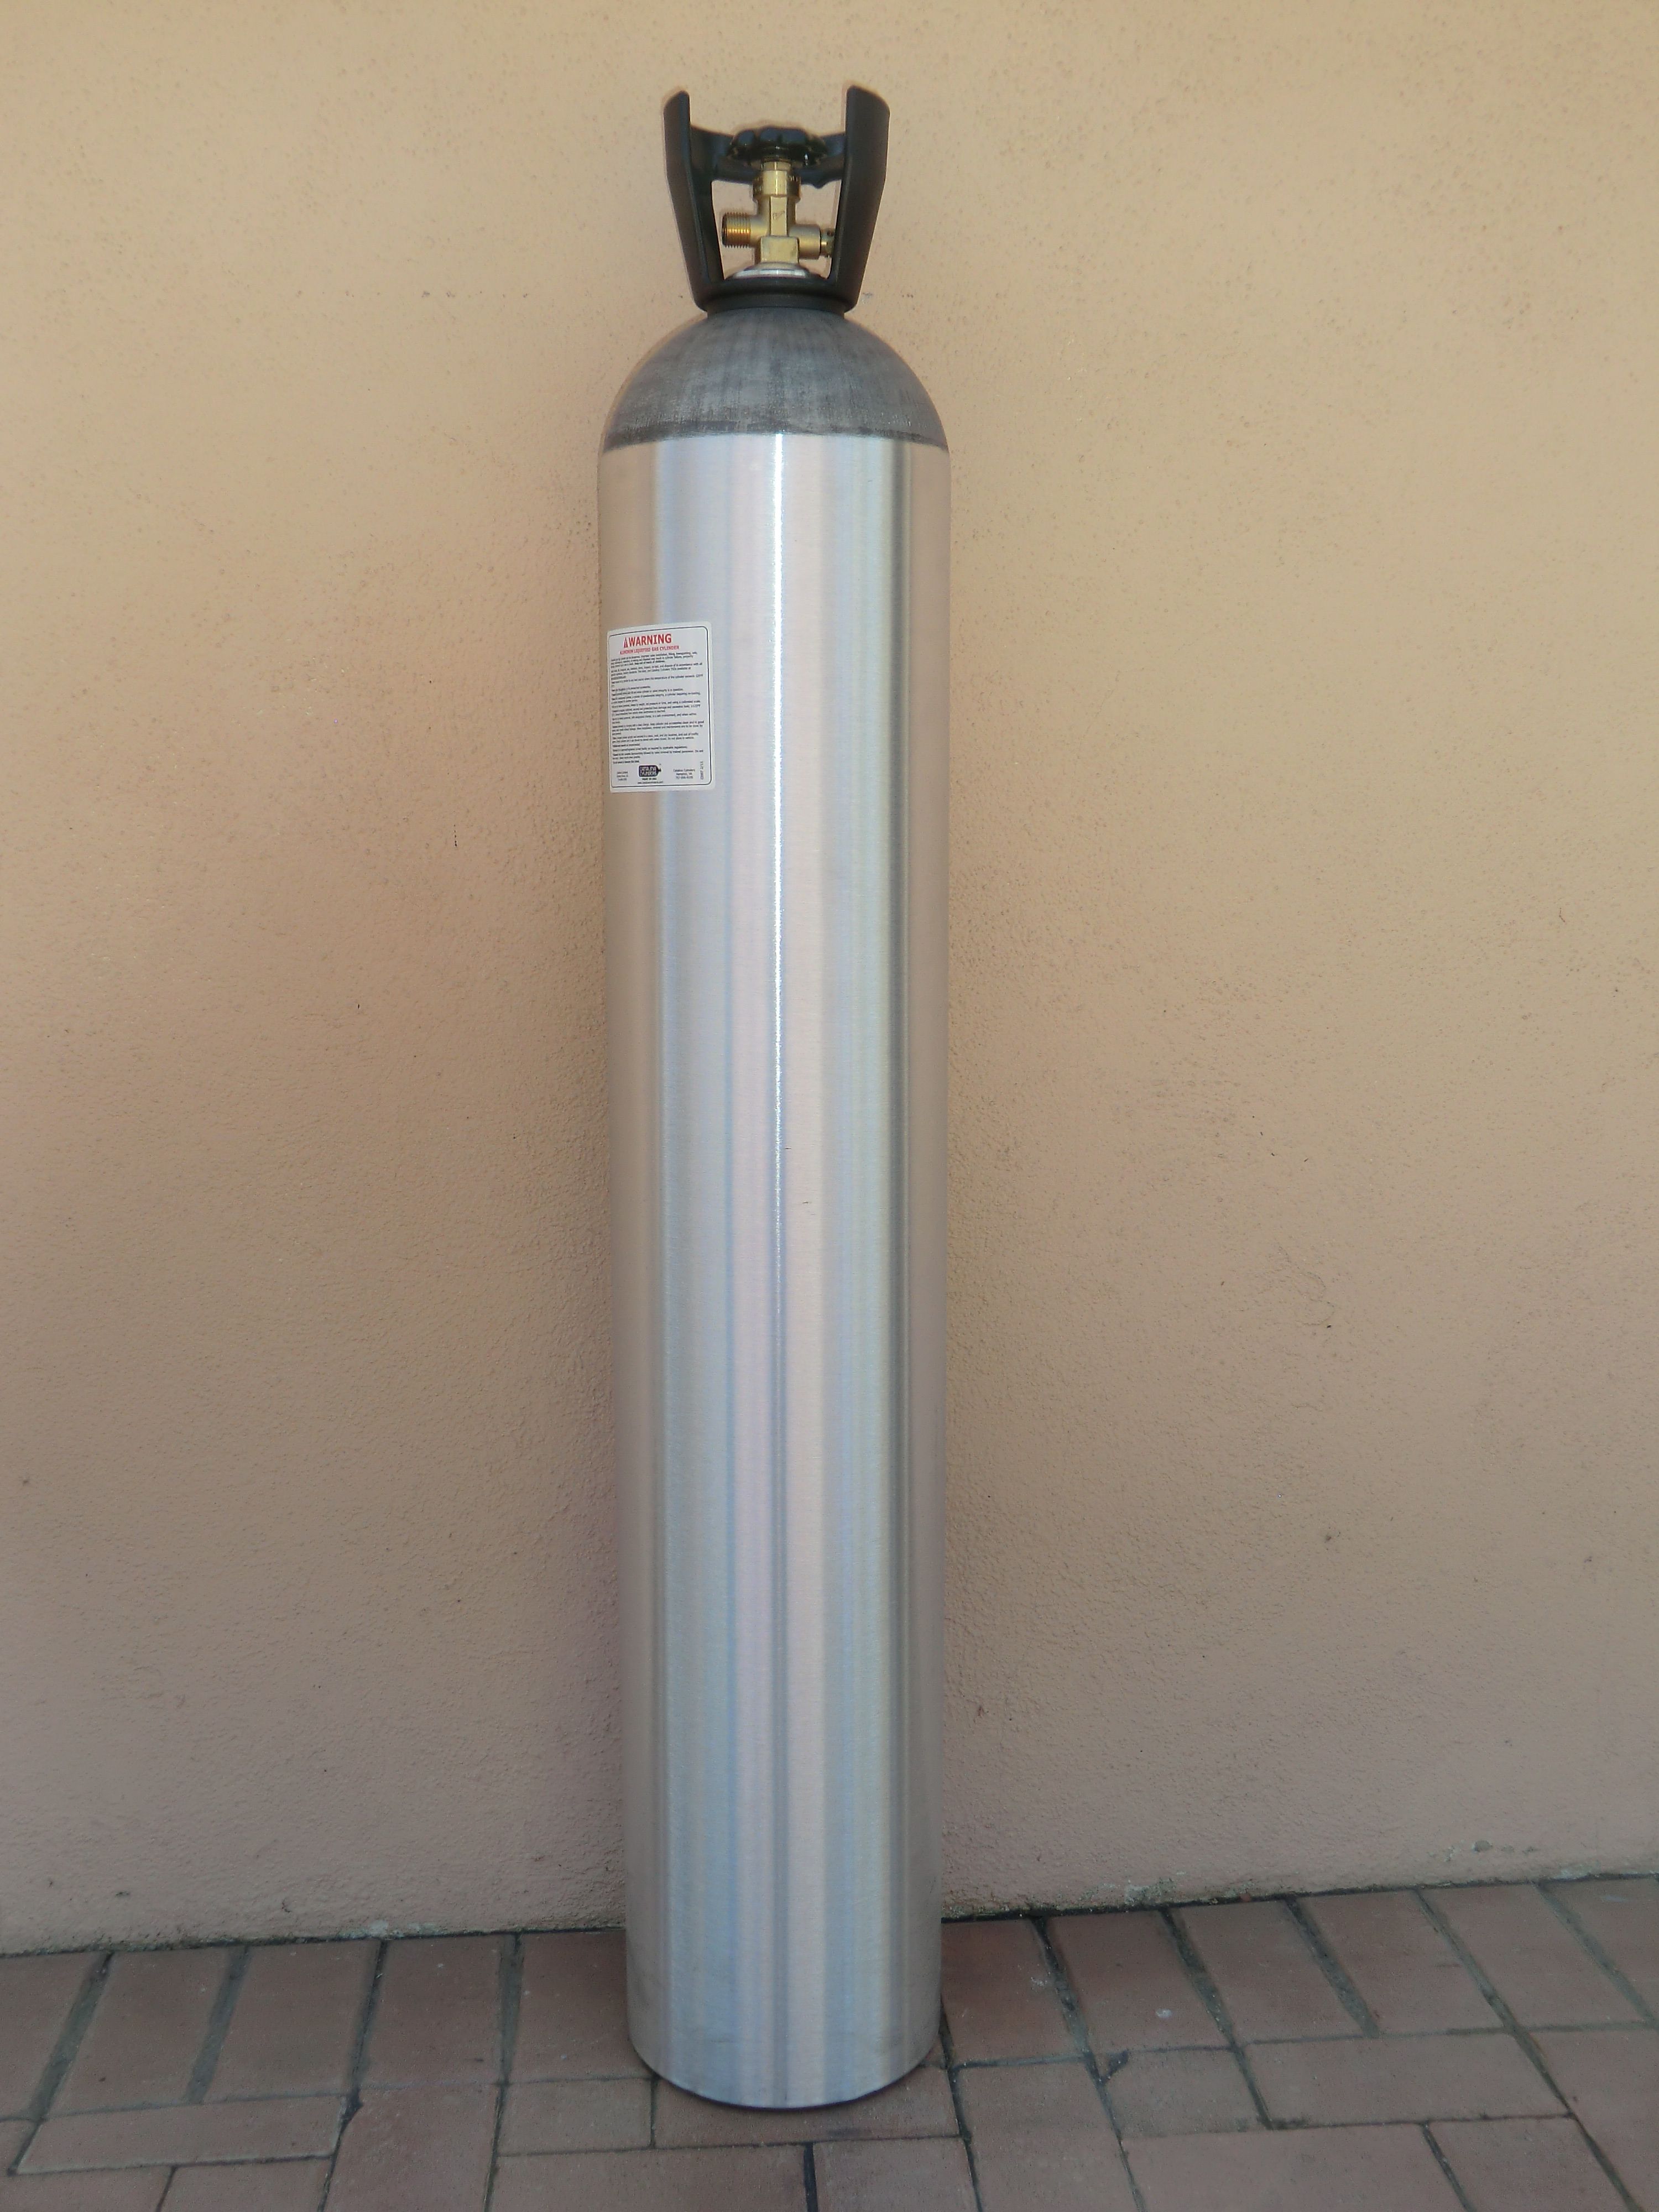 How do you find used CO2 tanks for sale?